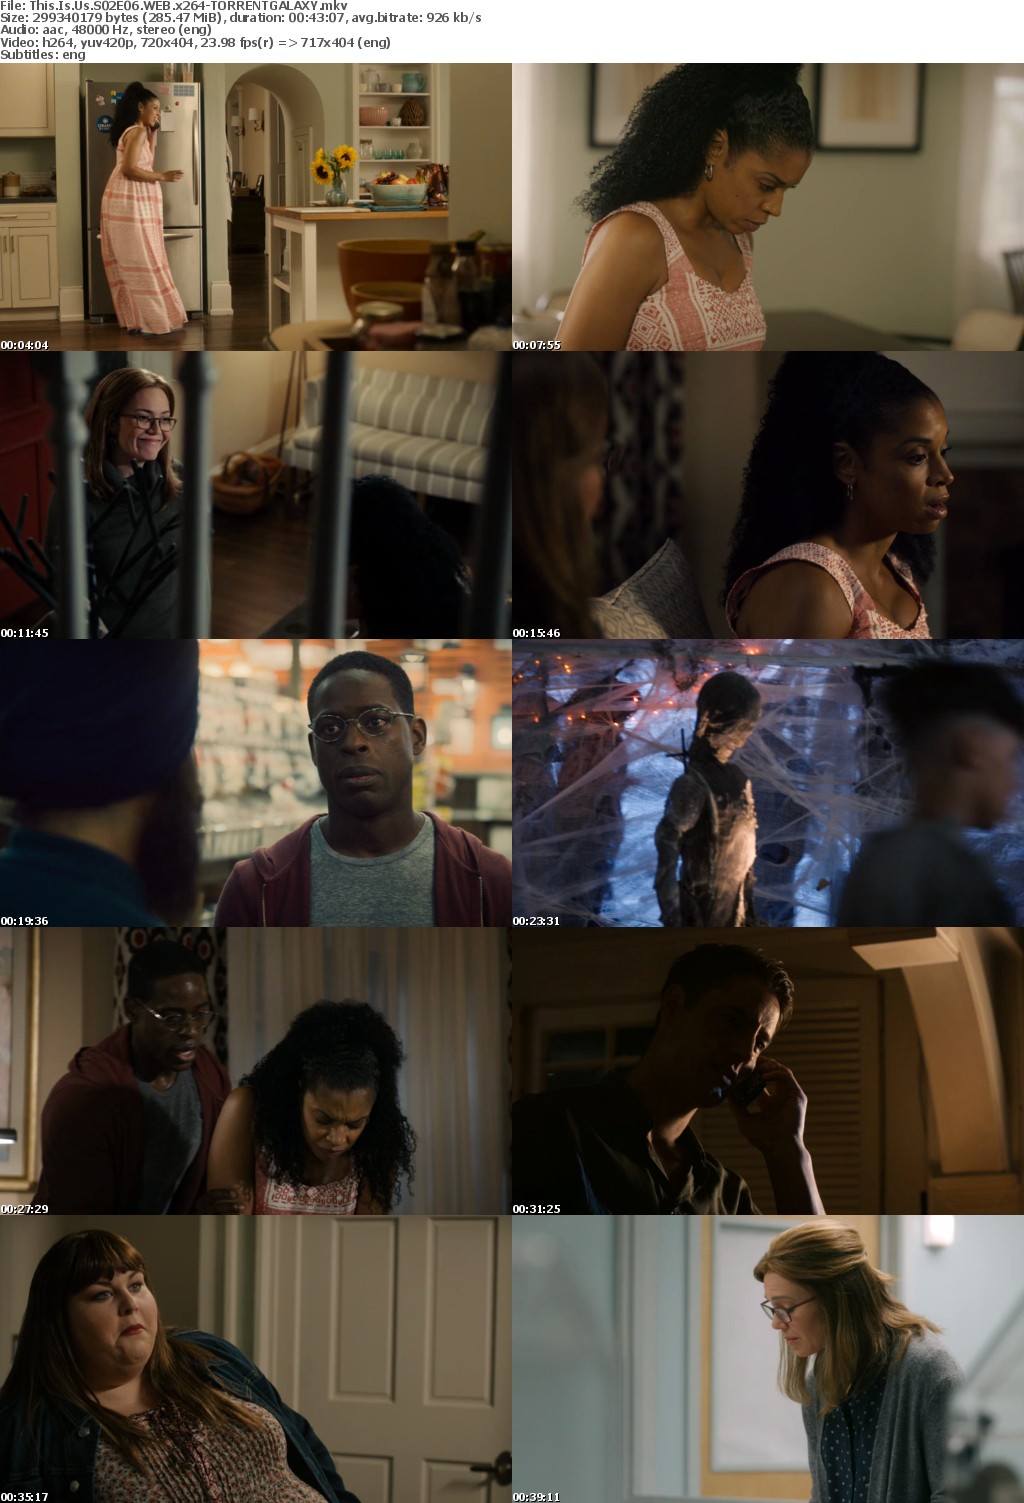 This Is Us S02E06 WEB x264-GALAXY